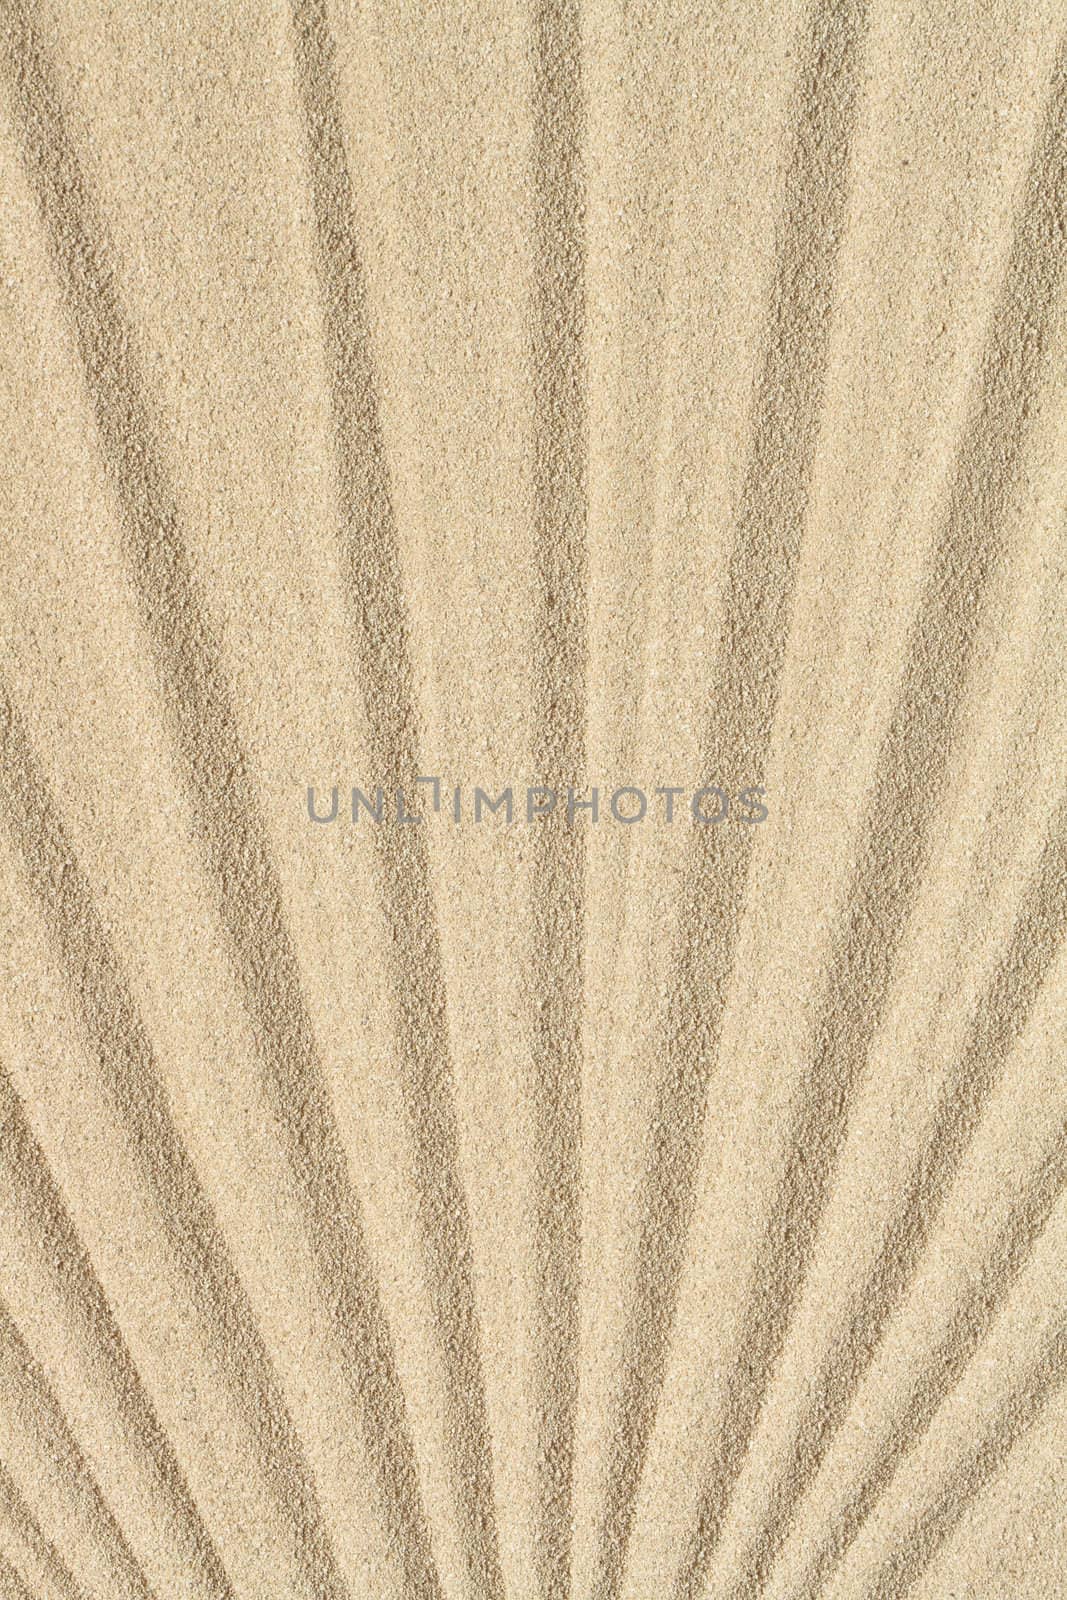 Abstract sand background with lines